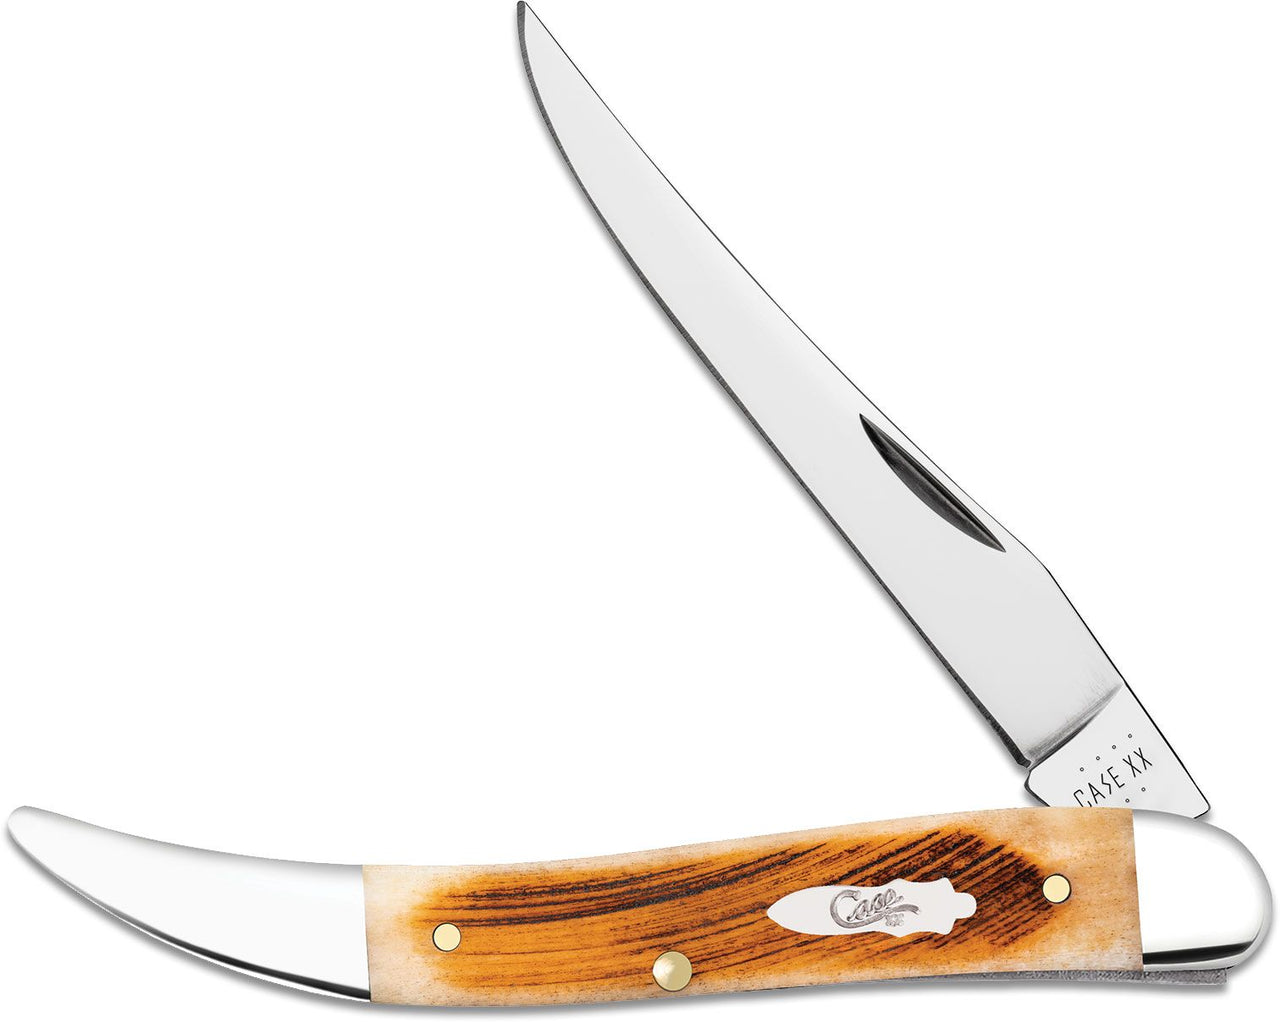 SMALL TEXAS TOOTHPICK RED BONE 00792 CASE